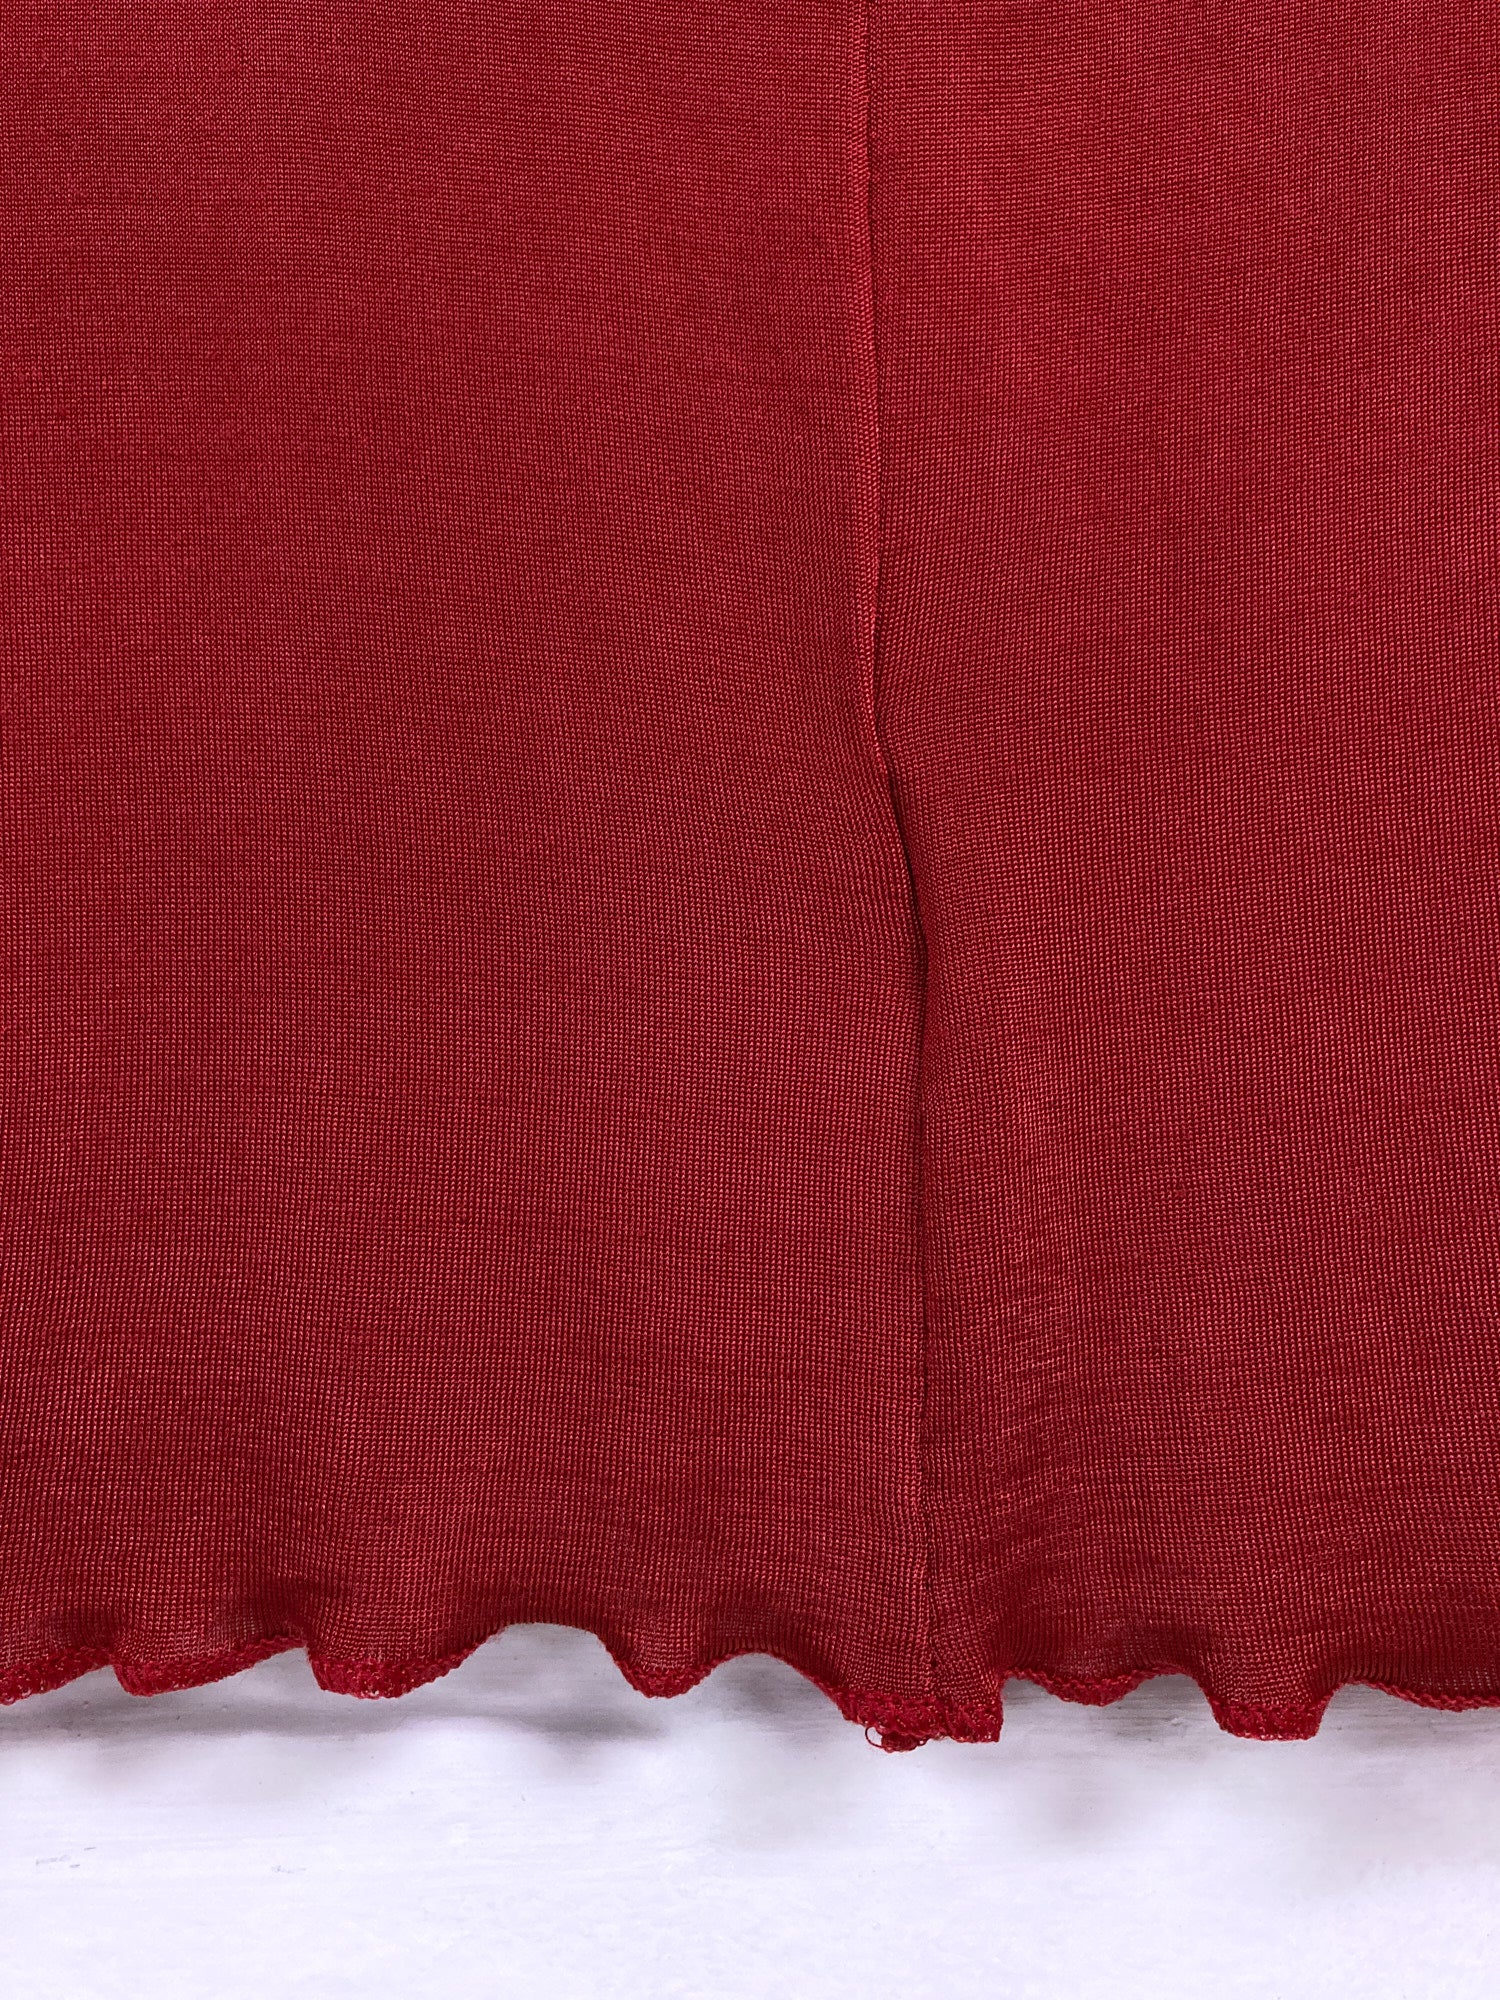 Jean Colonna shiny red sleeveless top with open back detail - S